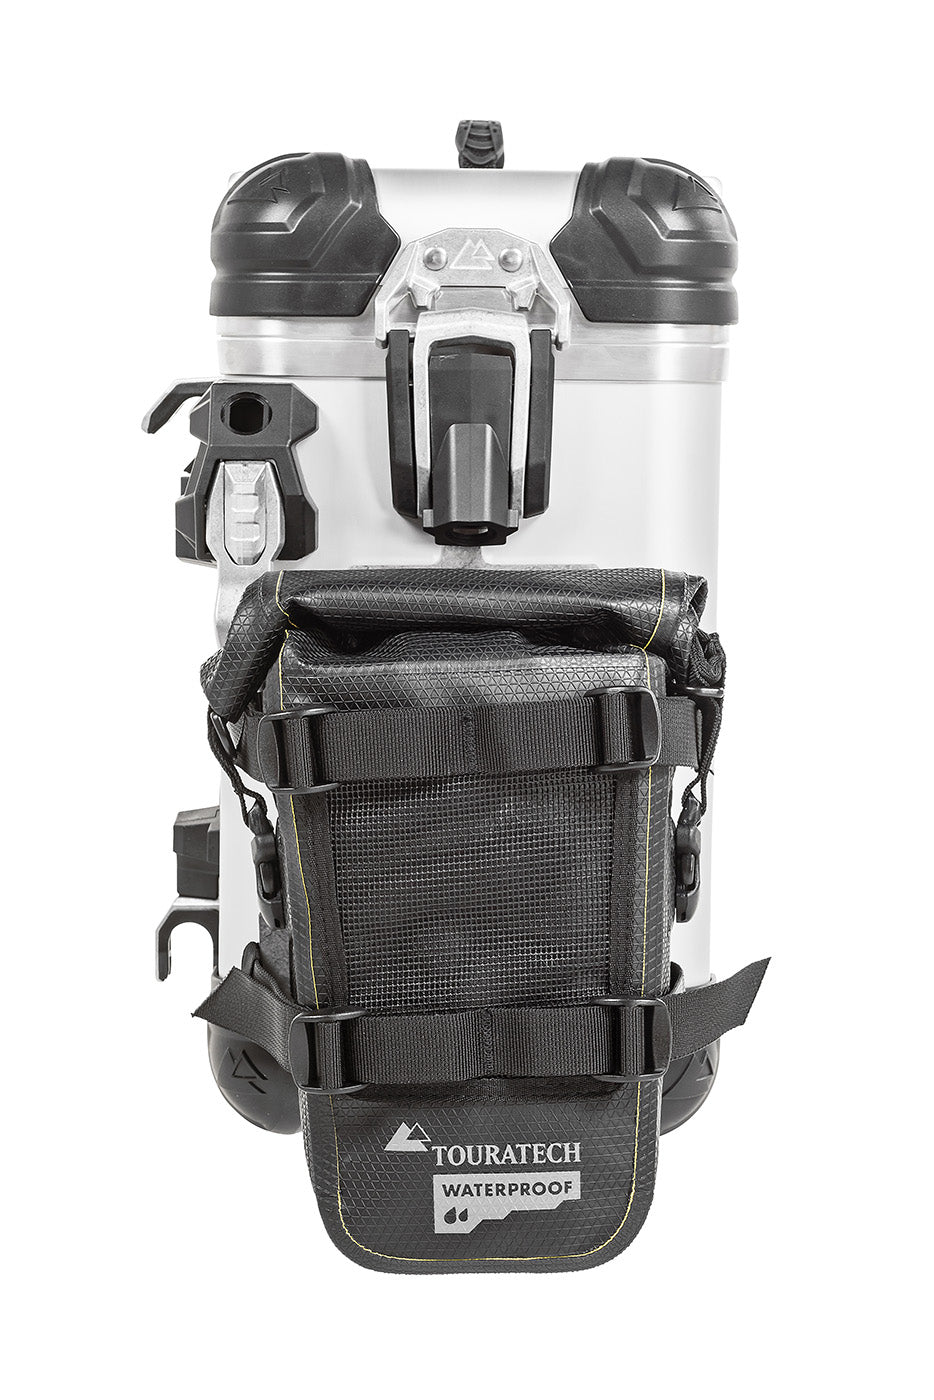 Additional Bag+ EXTREME Edition by Touratech Waterproof